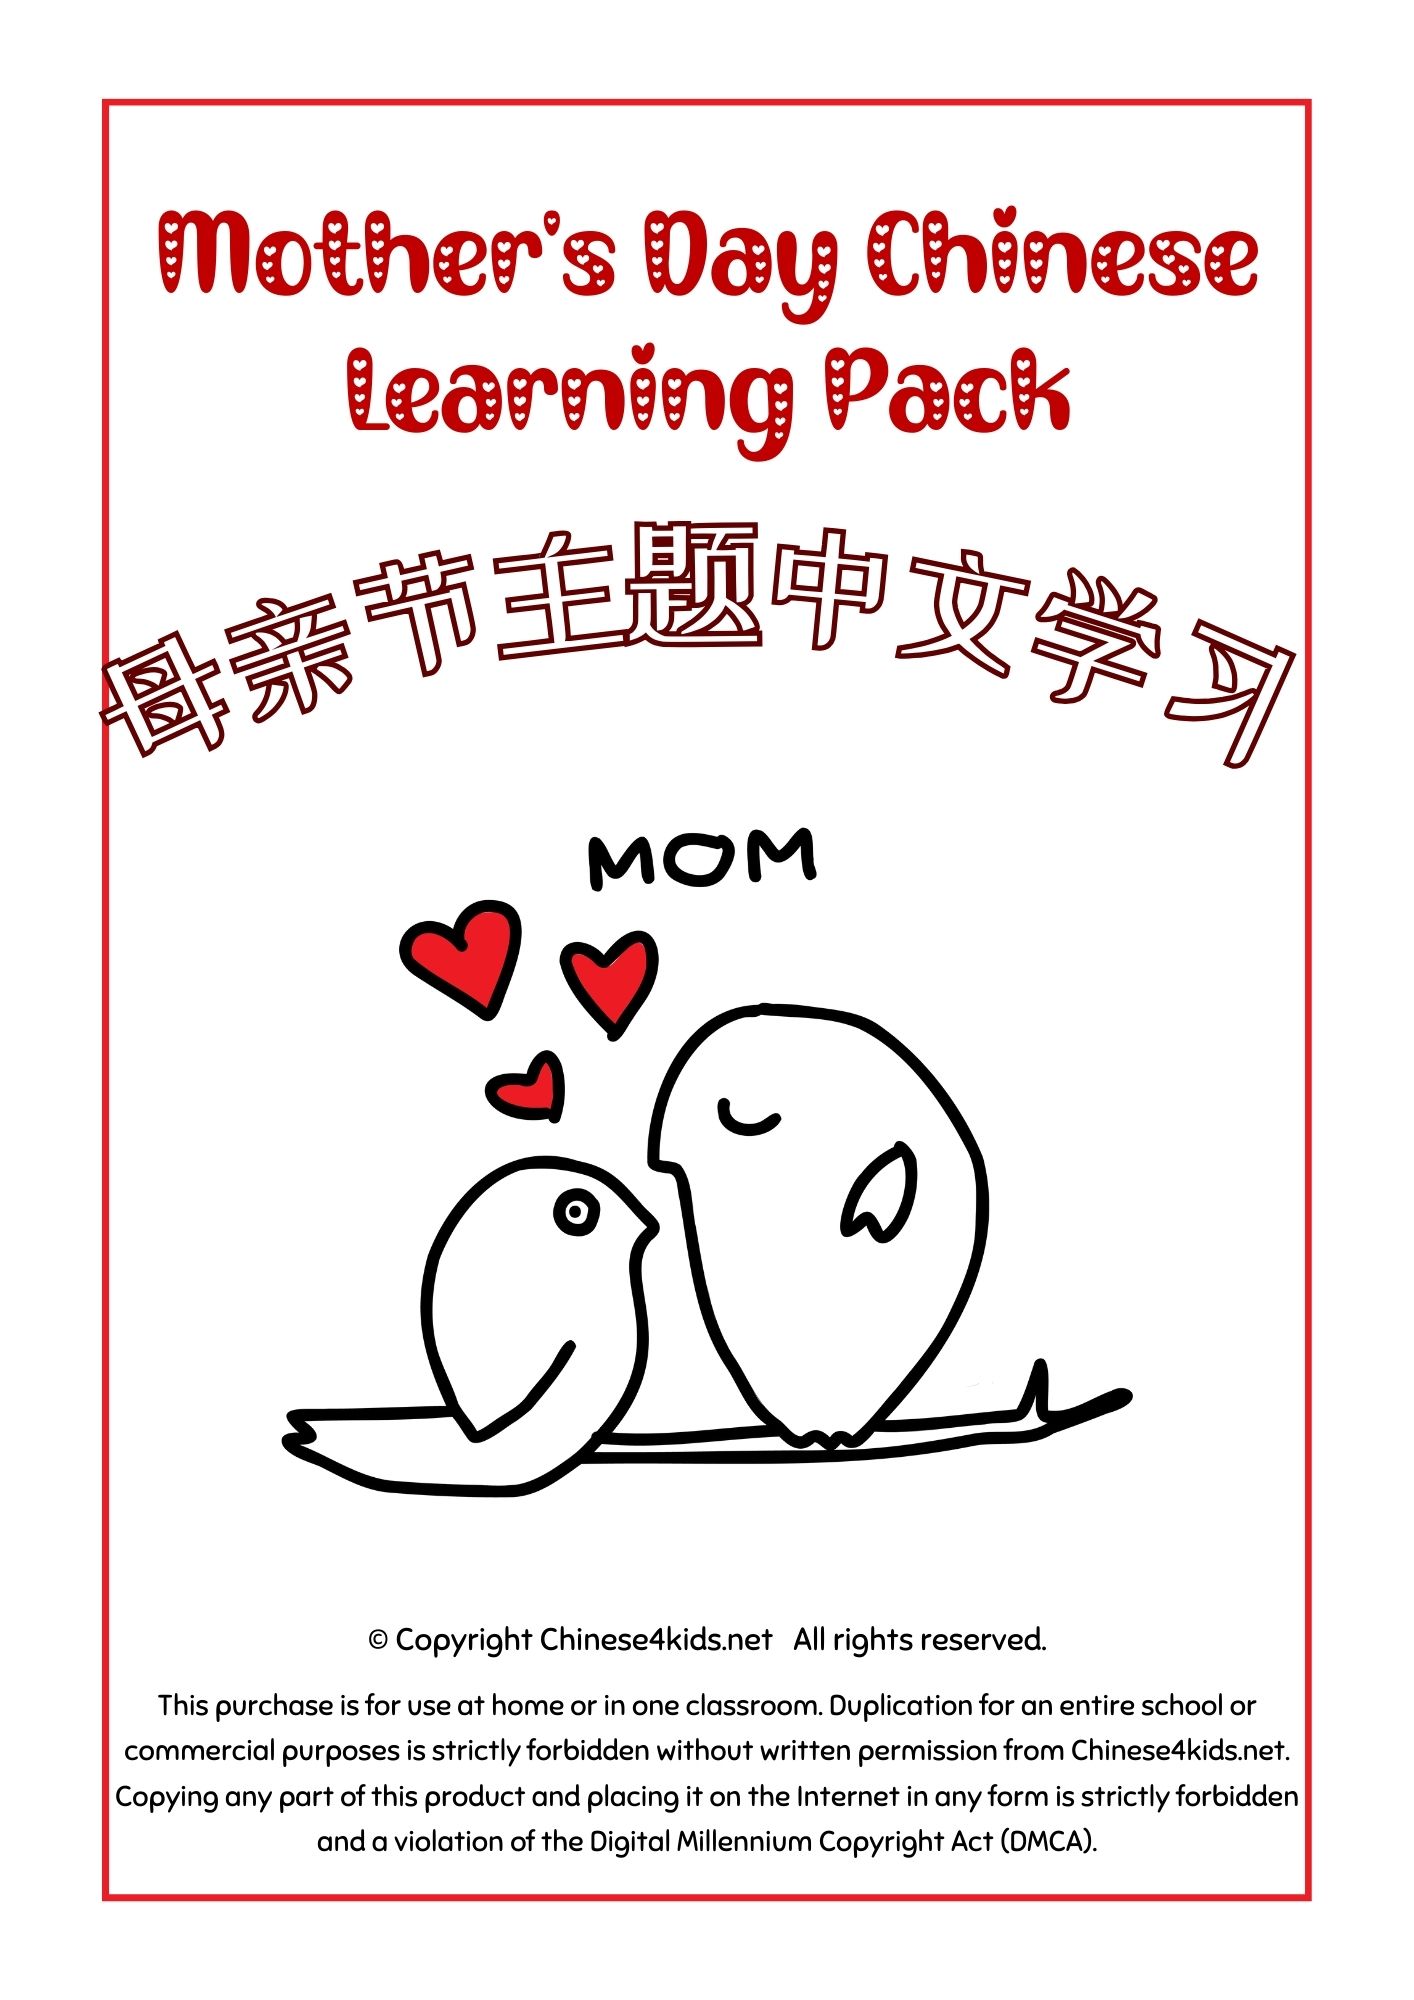 Mothers Day Chinese Learning Pack for Kids